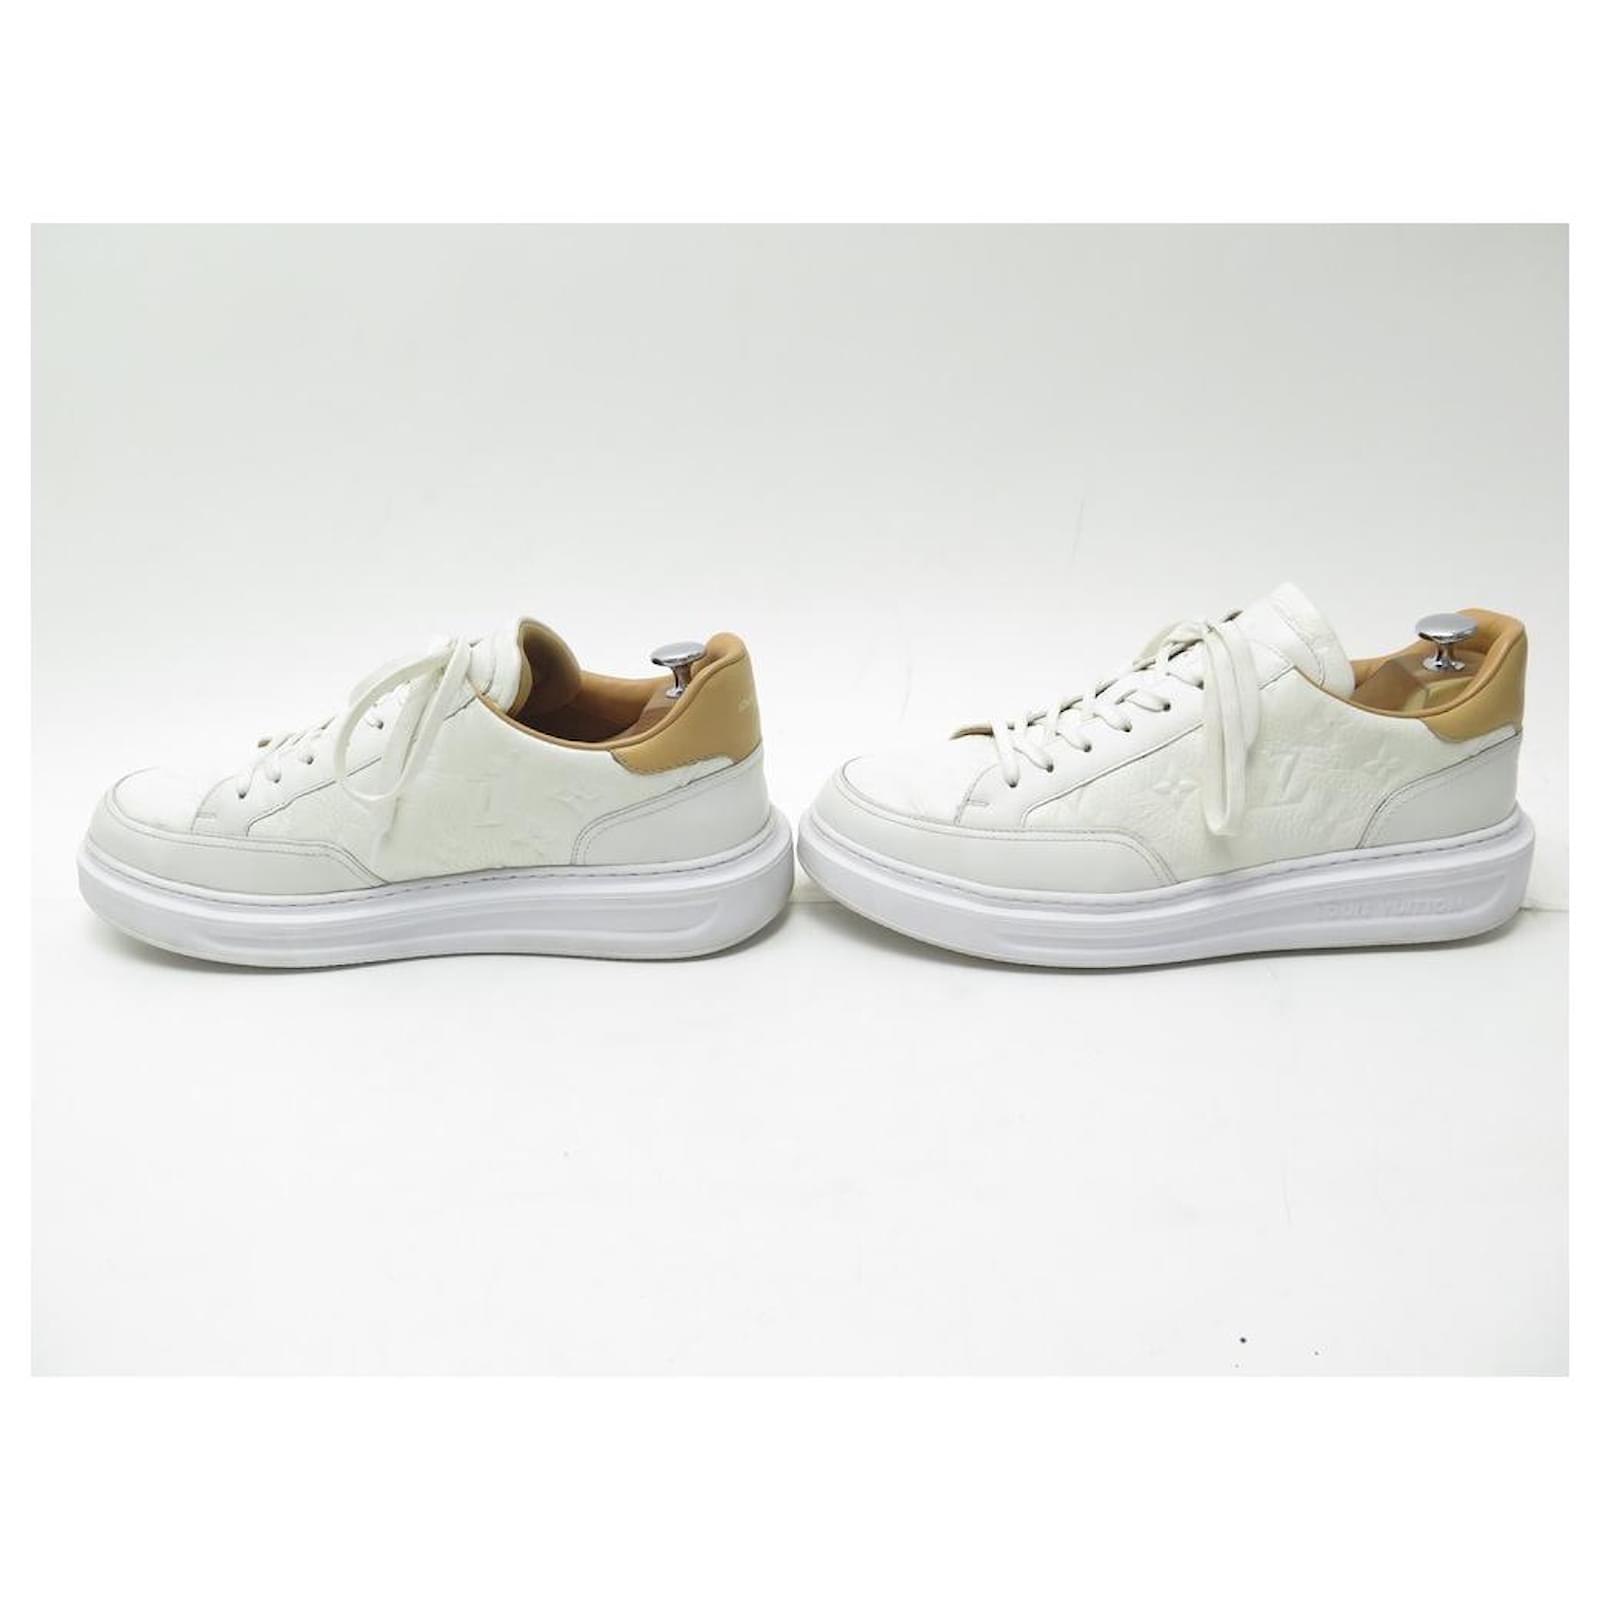 LOUIS VUITTON Beverly Hills Line Sneakers shoes 8 1/2 white